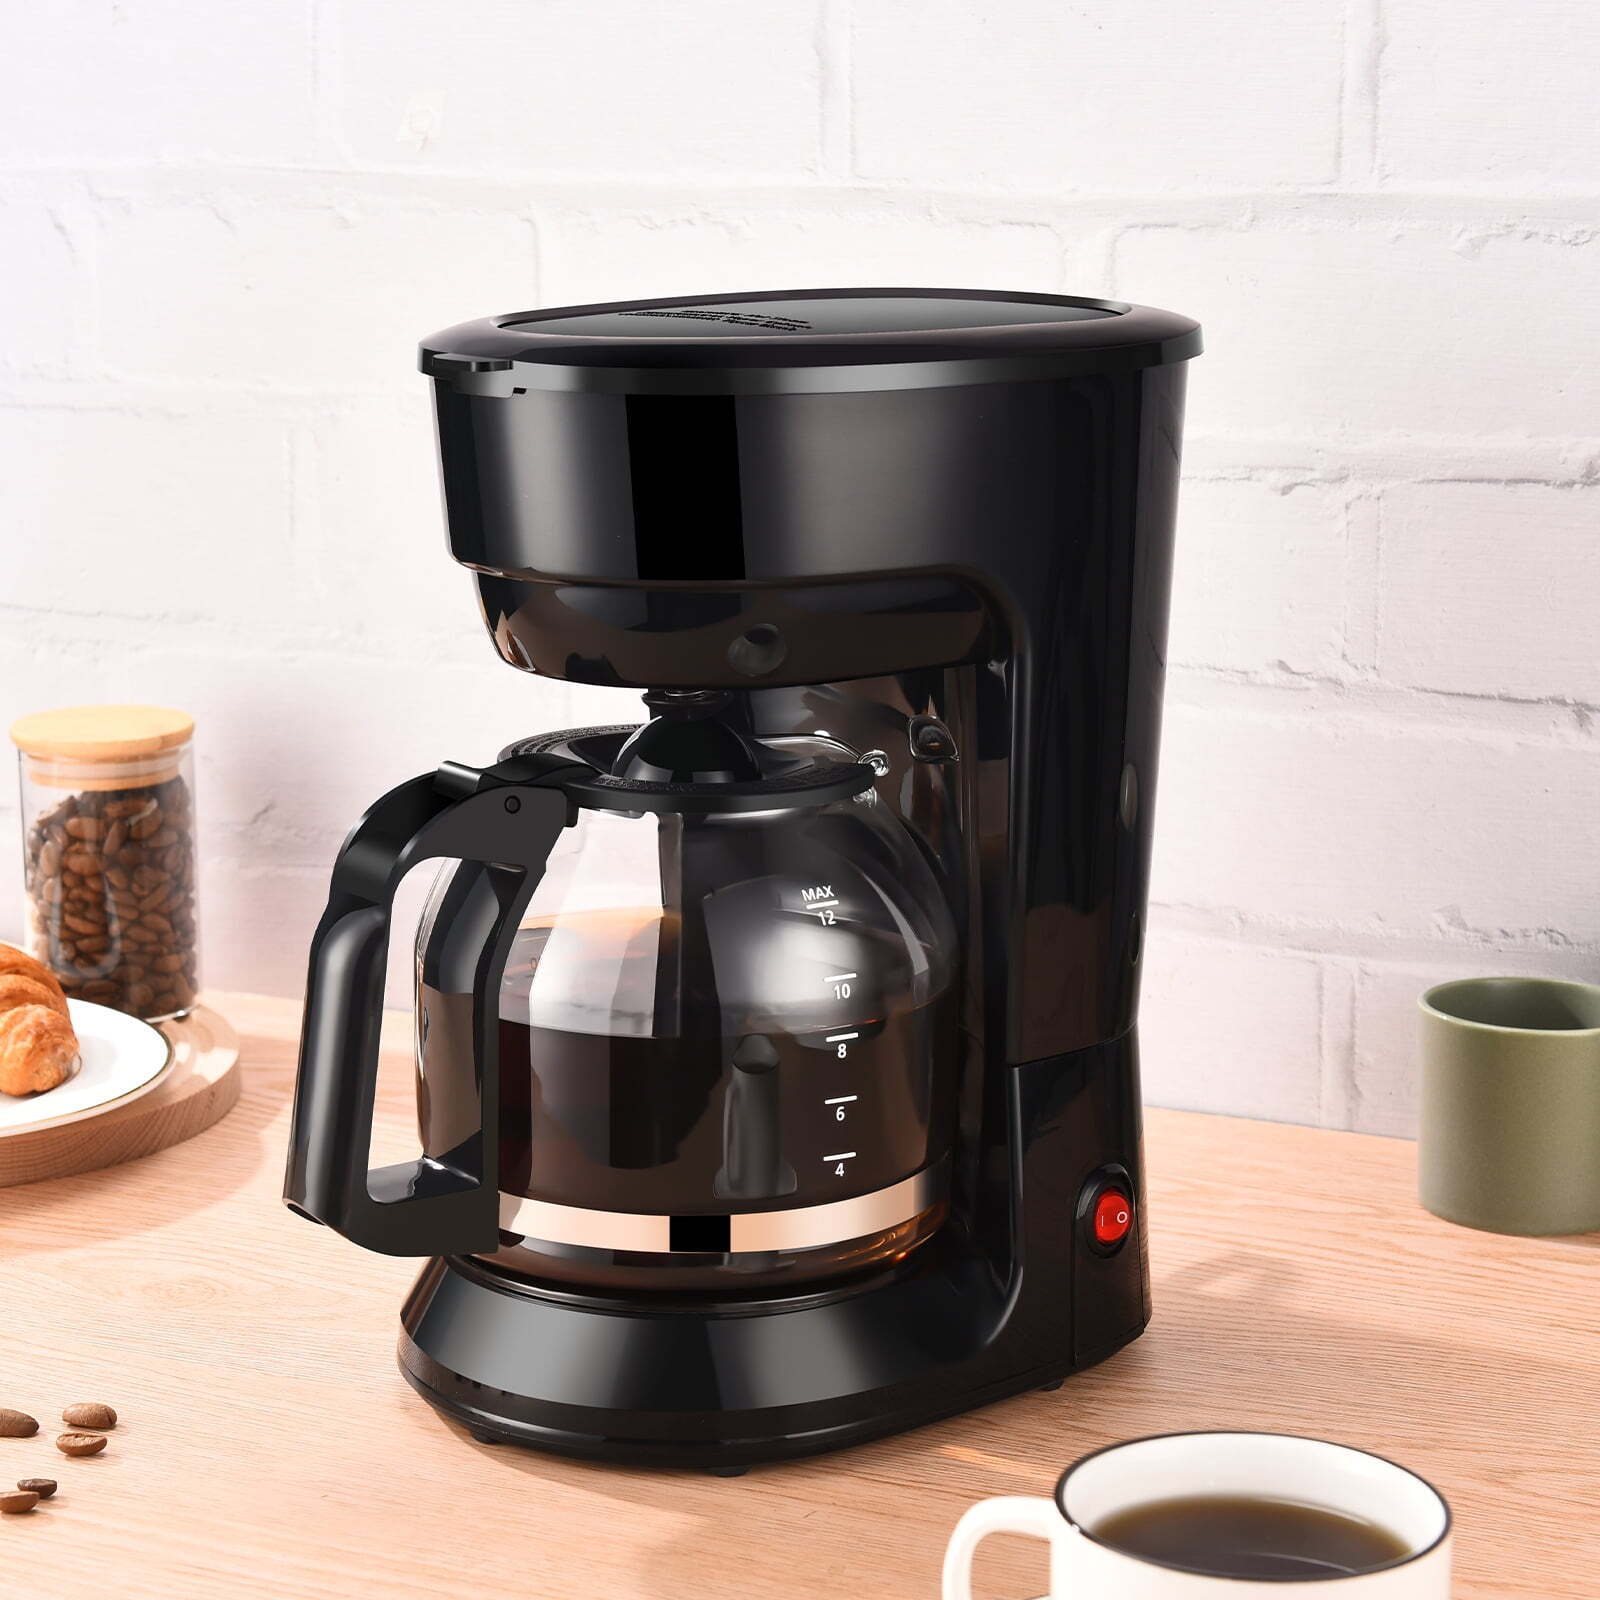 Mainstays 12 Cup Coffee Maker Black, Drip Coffee Maker，Automatic Shut-Off